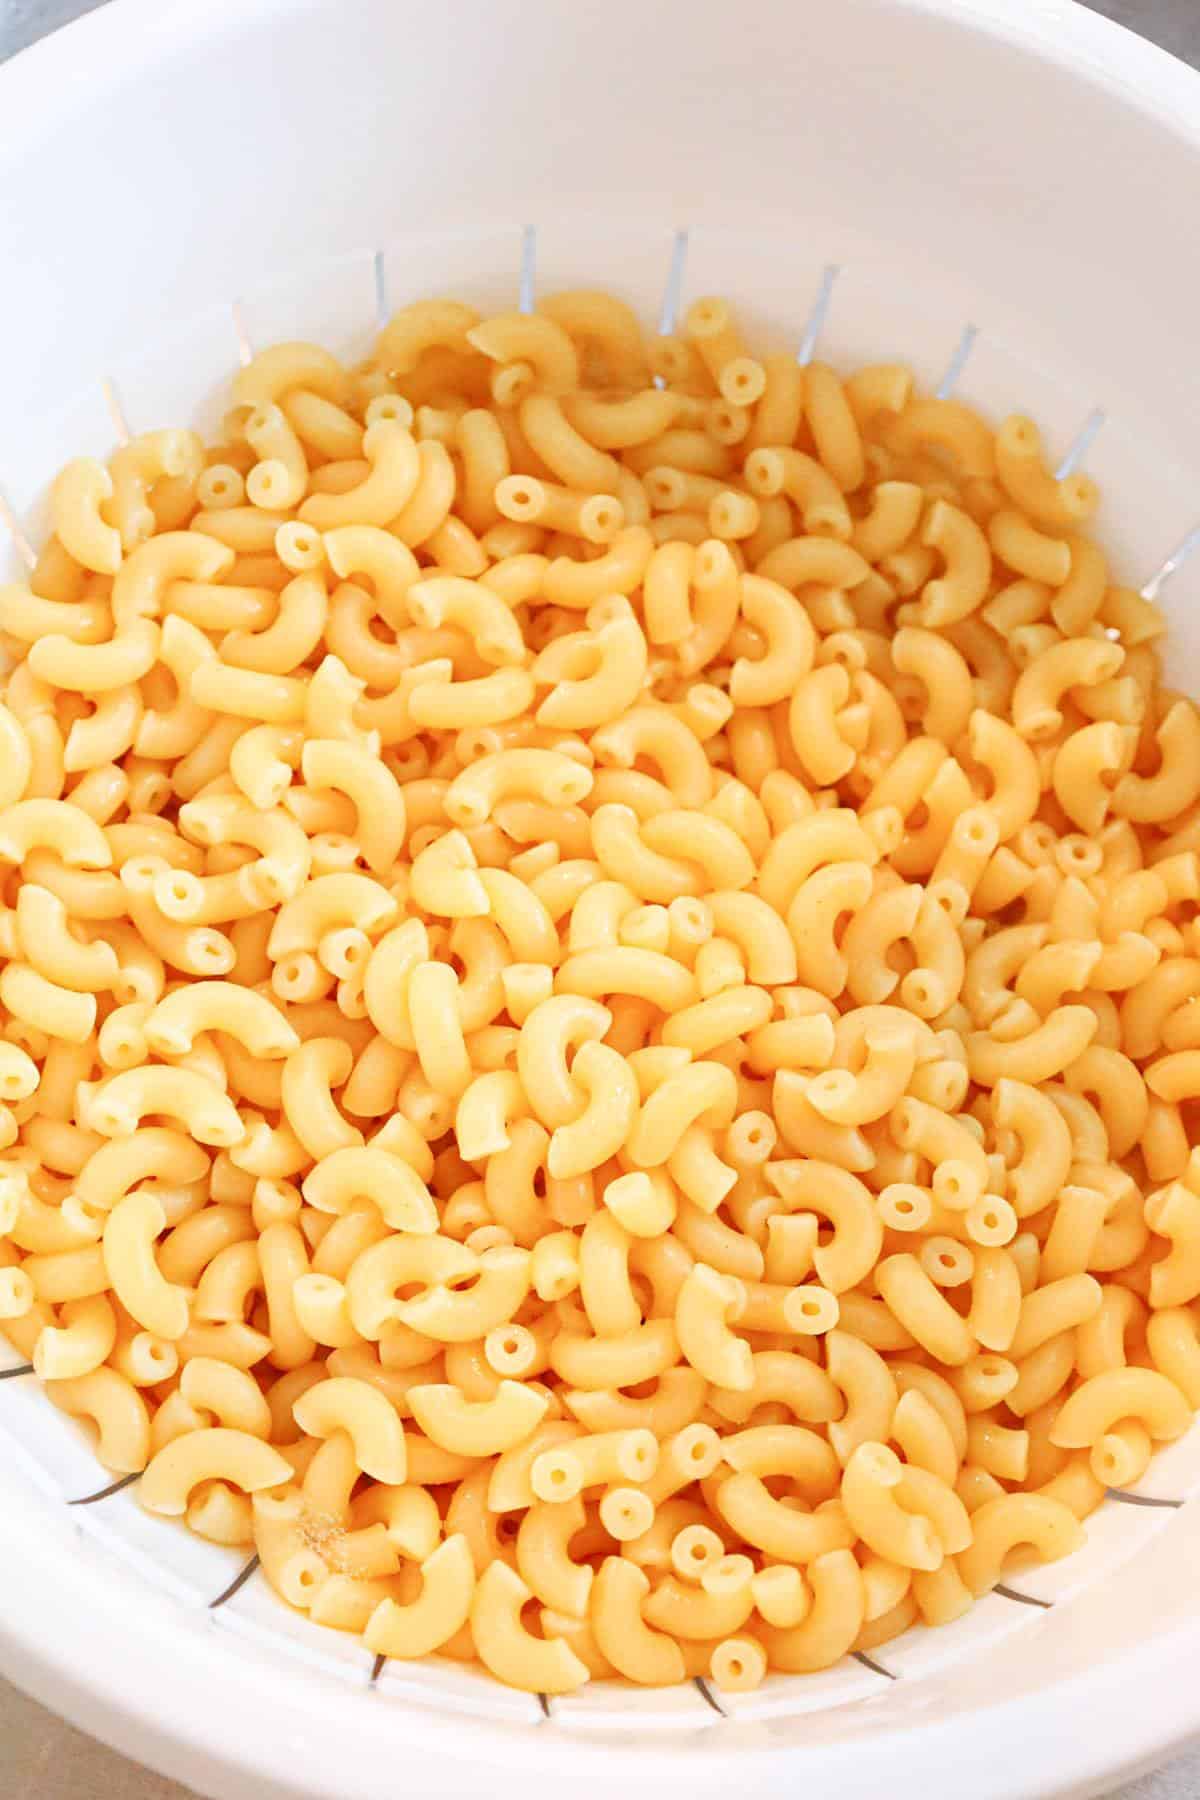 cooked macaroni noodles in a colander